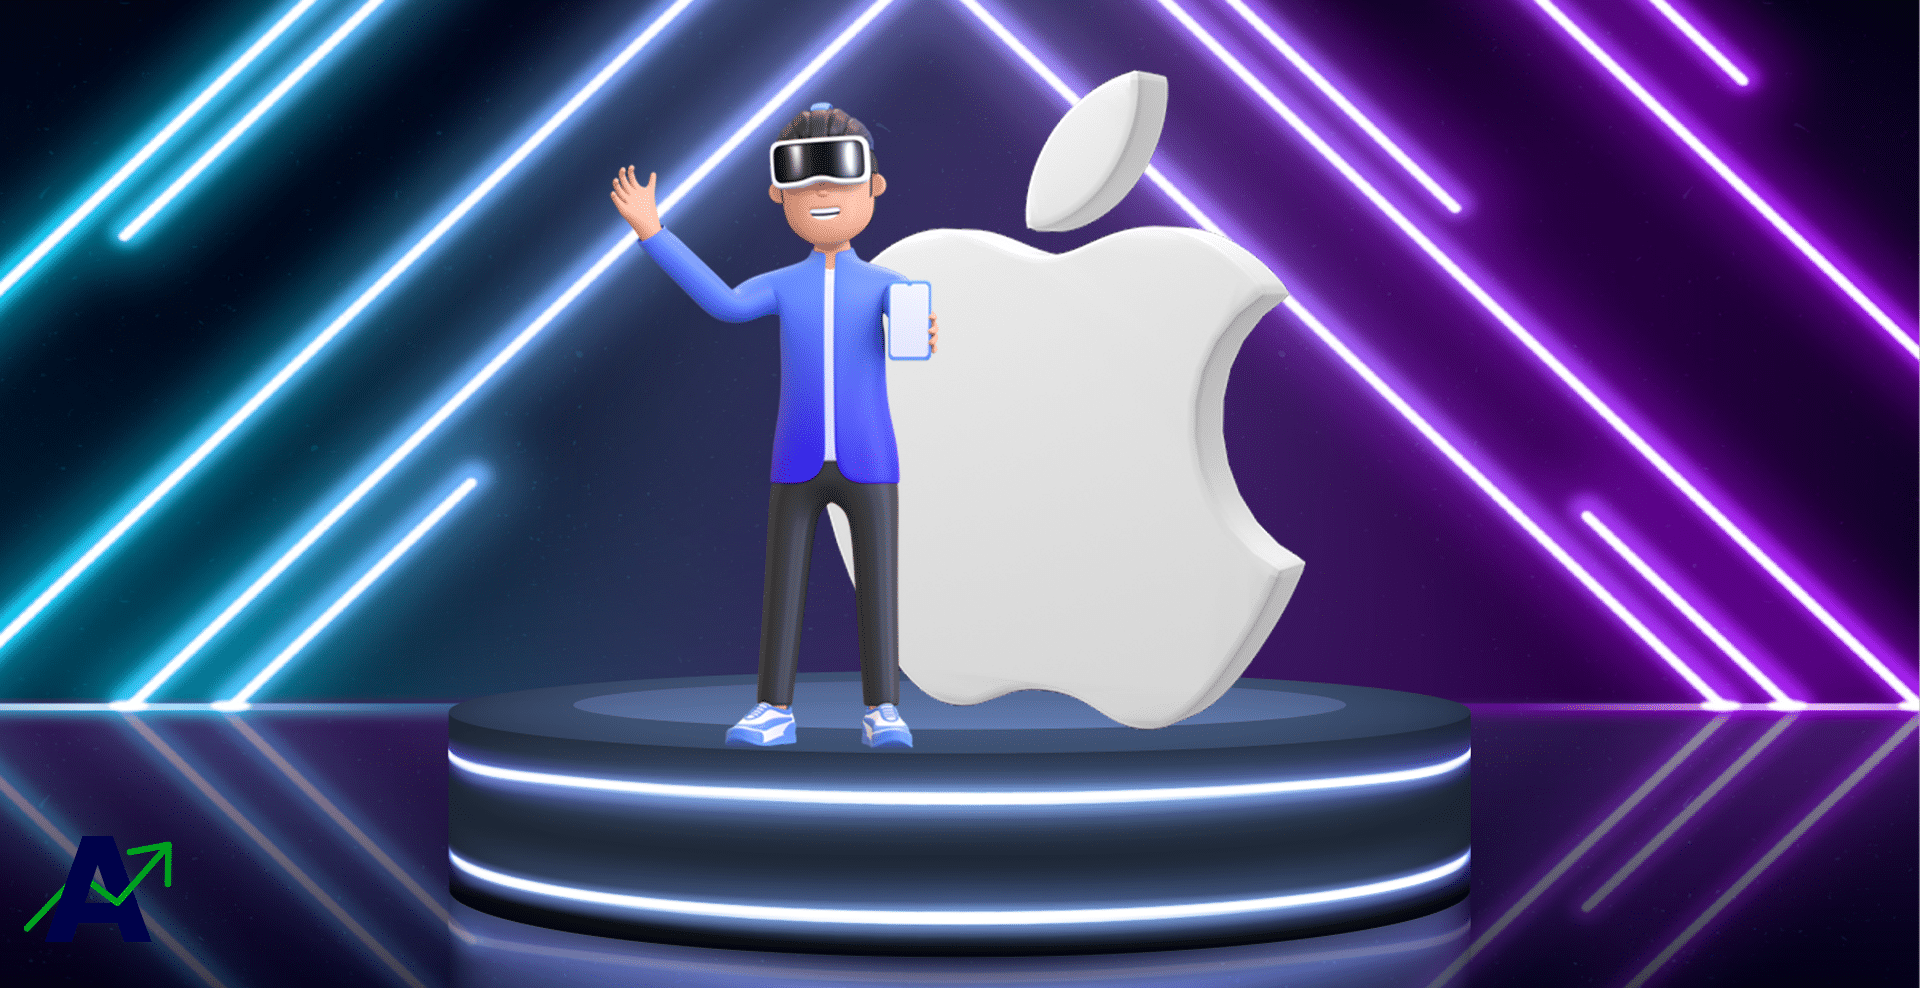 Apple and Metaverse - What is Apple's view of Metaverse